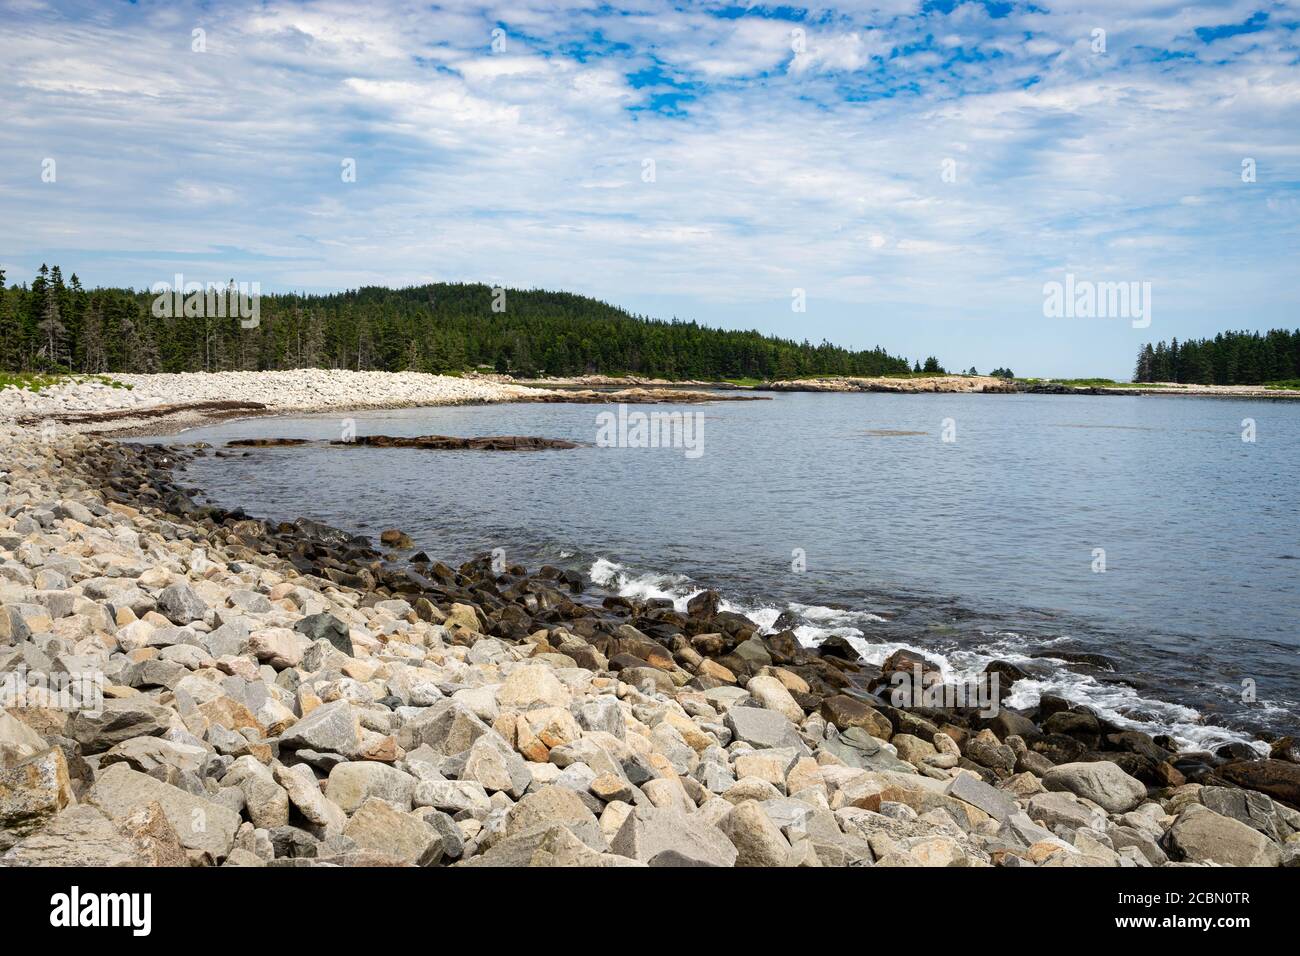 Trees sand rocks urround a cove in the Schoodic Peninsula in the Acadia National Park in Maine Stock Photo